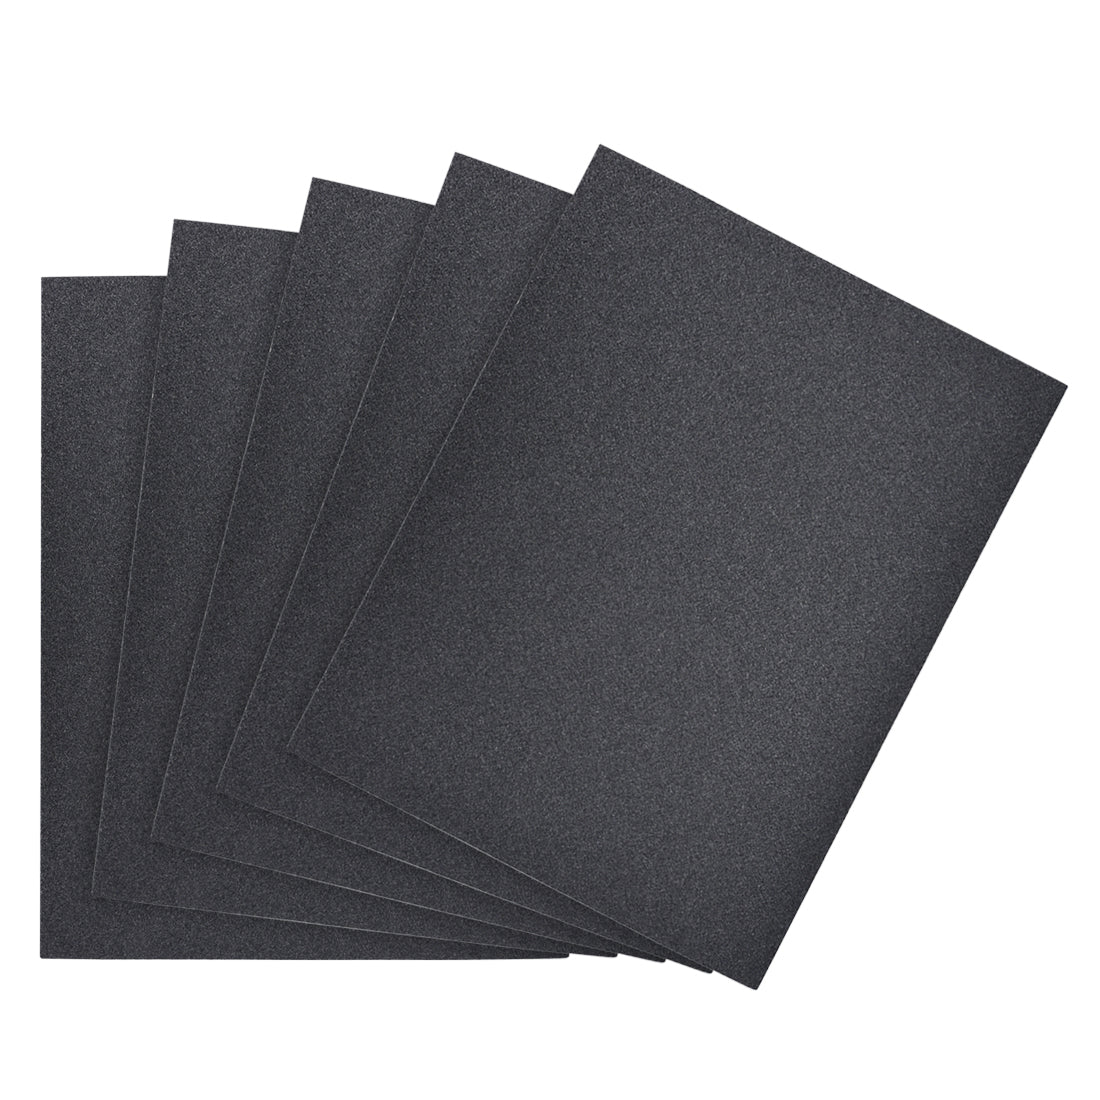 uxcell Uxcell Waterproof Sandpaper, Wet Dry Sand Paper Grit of 120, 11 x 9inch 5pcs